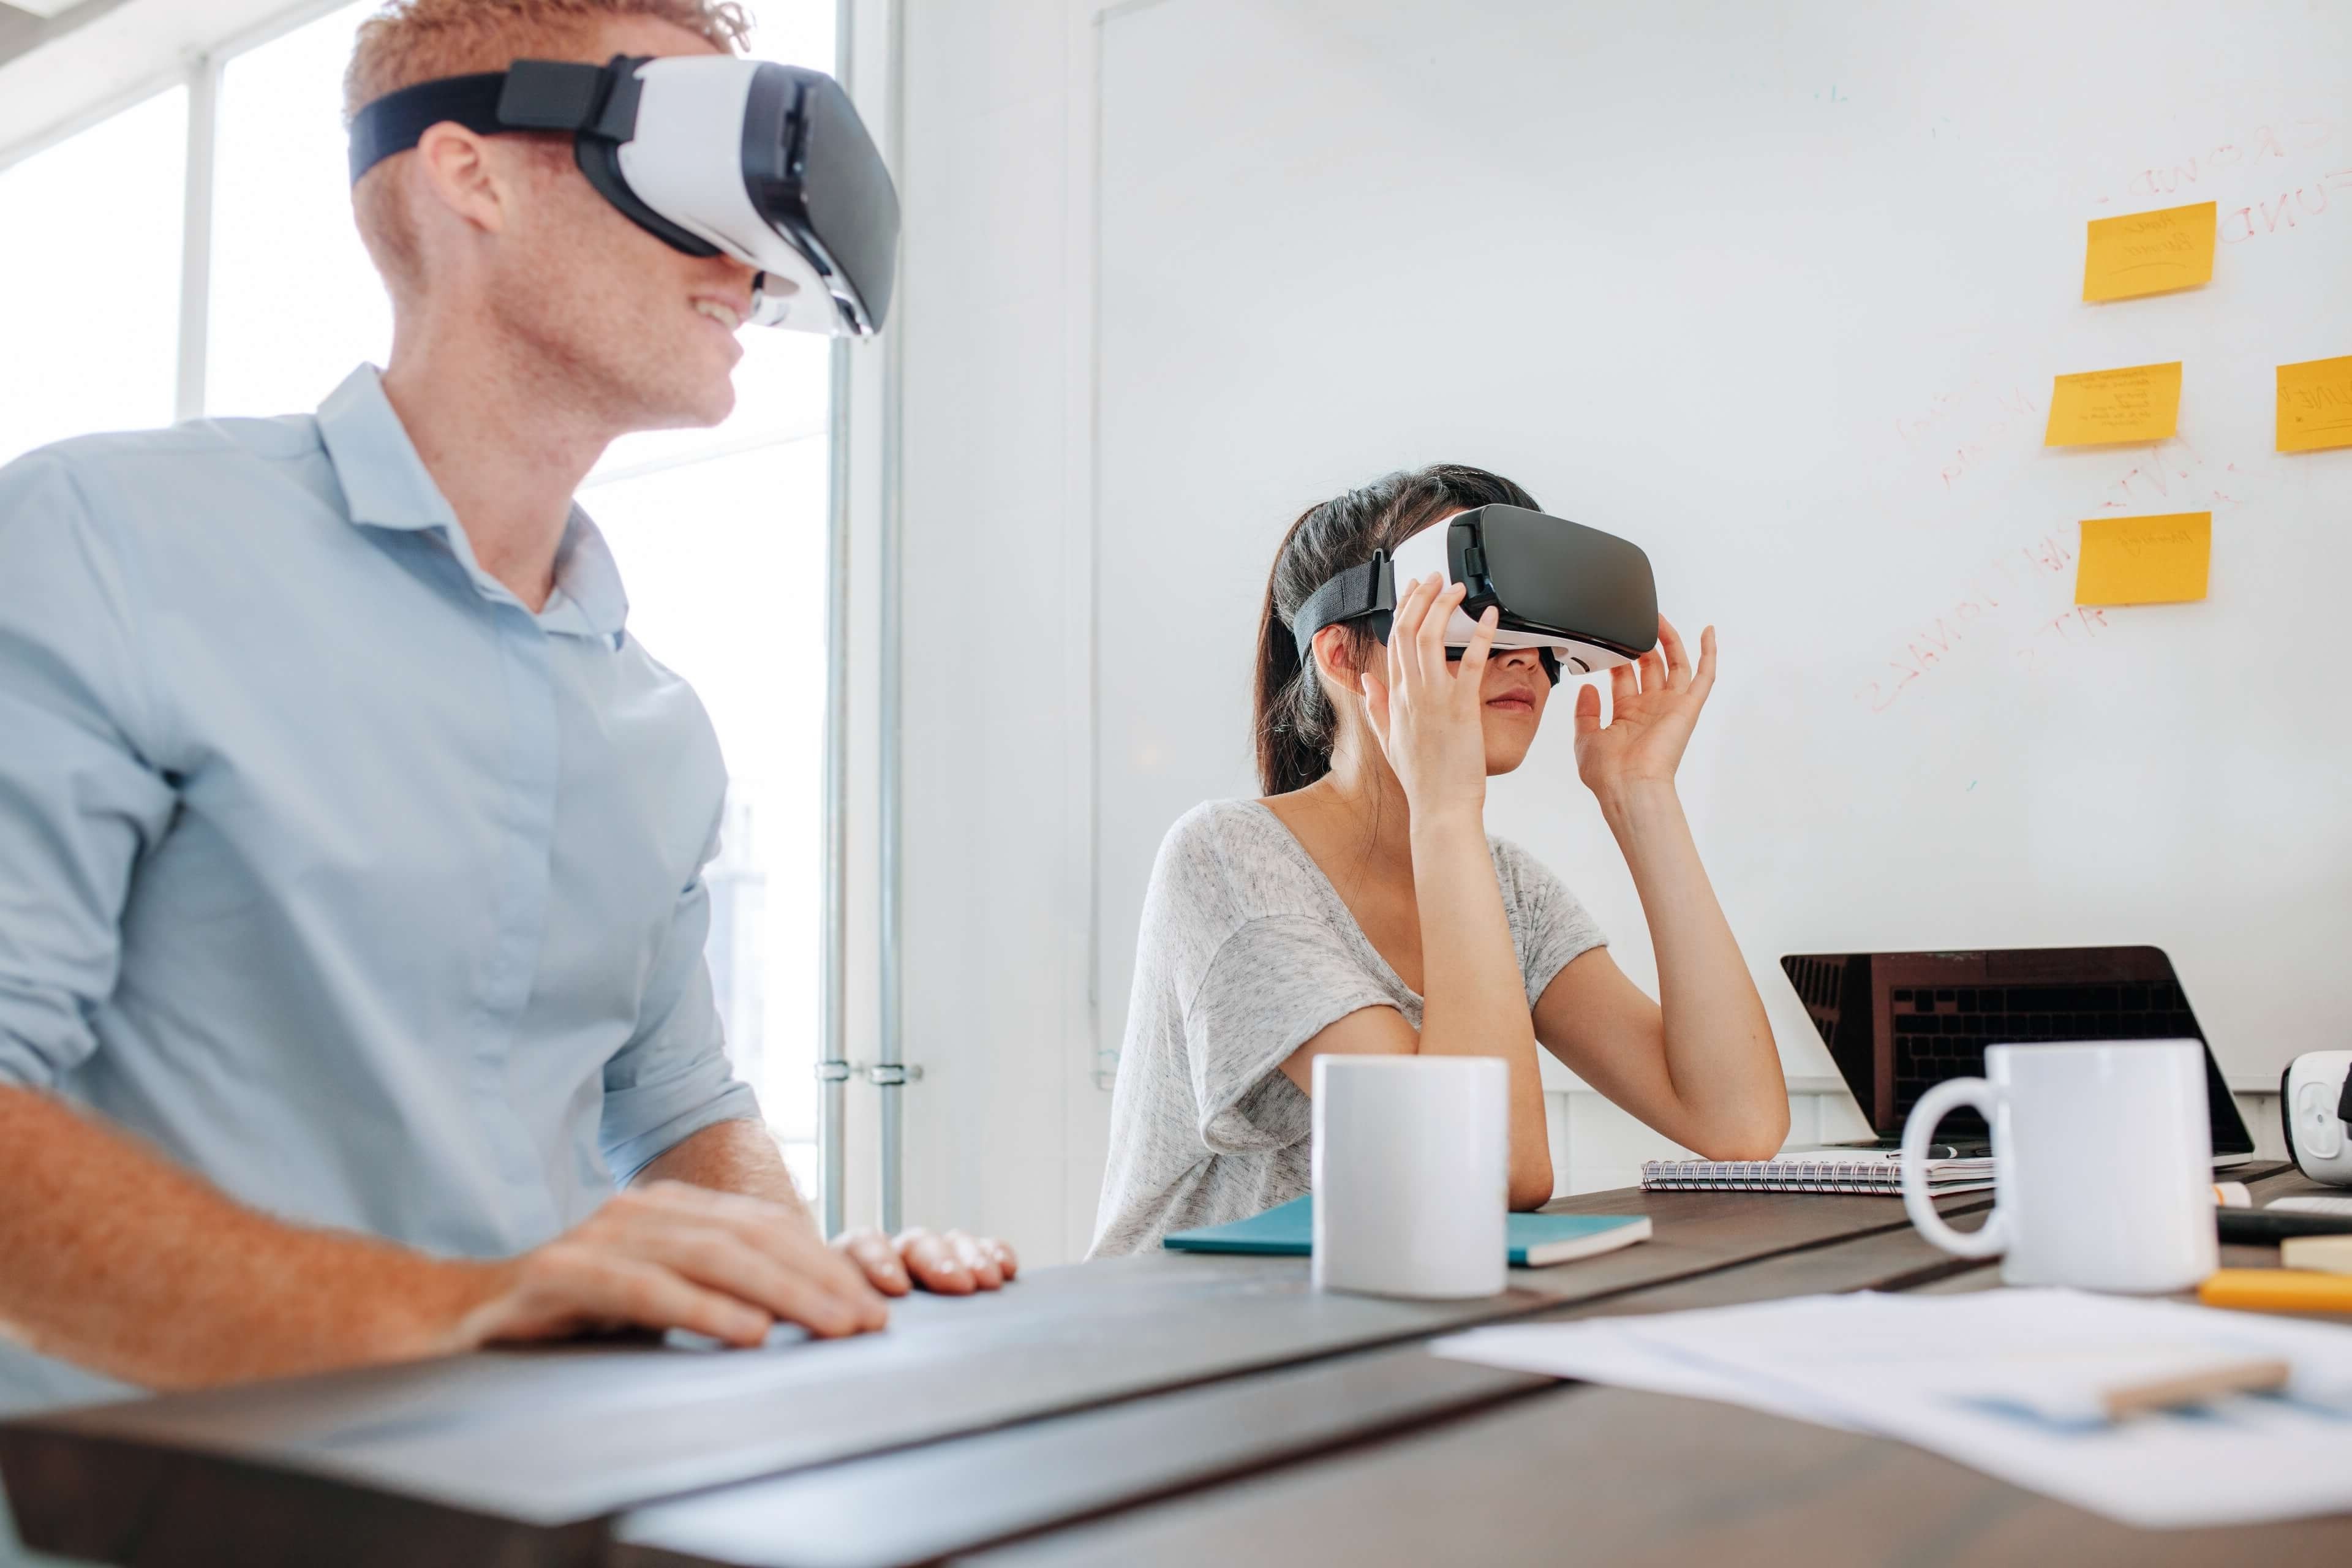 A man and woman using virtual reality headsets        